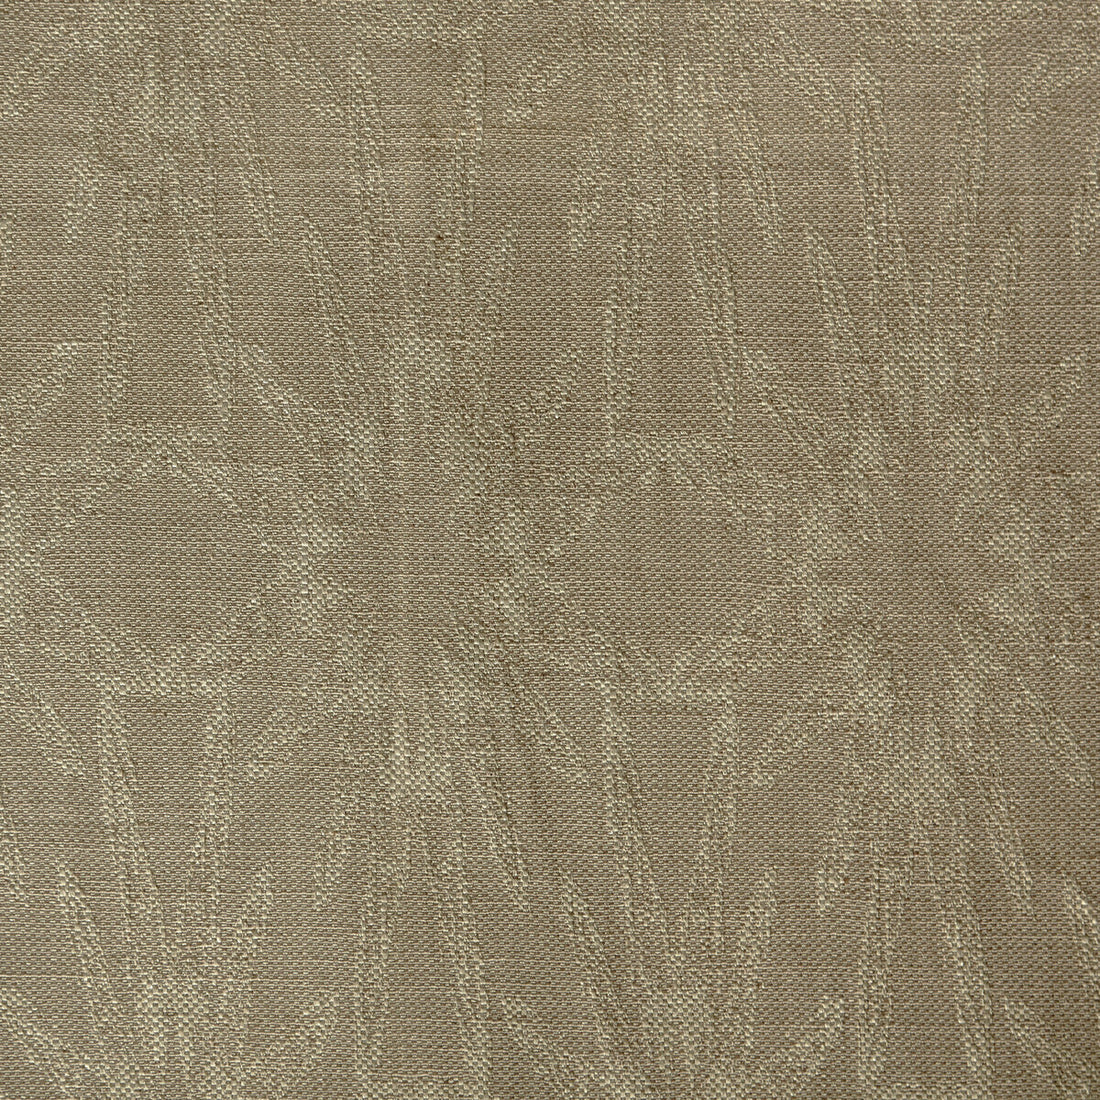 Starfish fabric in natural color - pattern GWF-3202.16.0 - by Lee Jofa Modern in the Allegra Hicks Islands collection